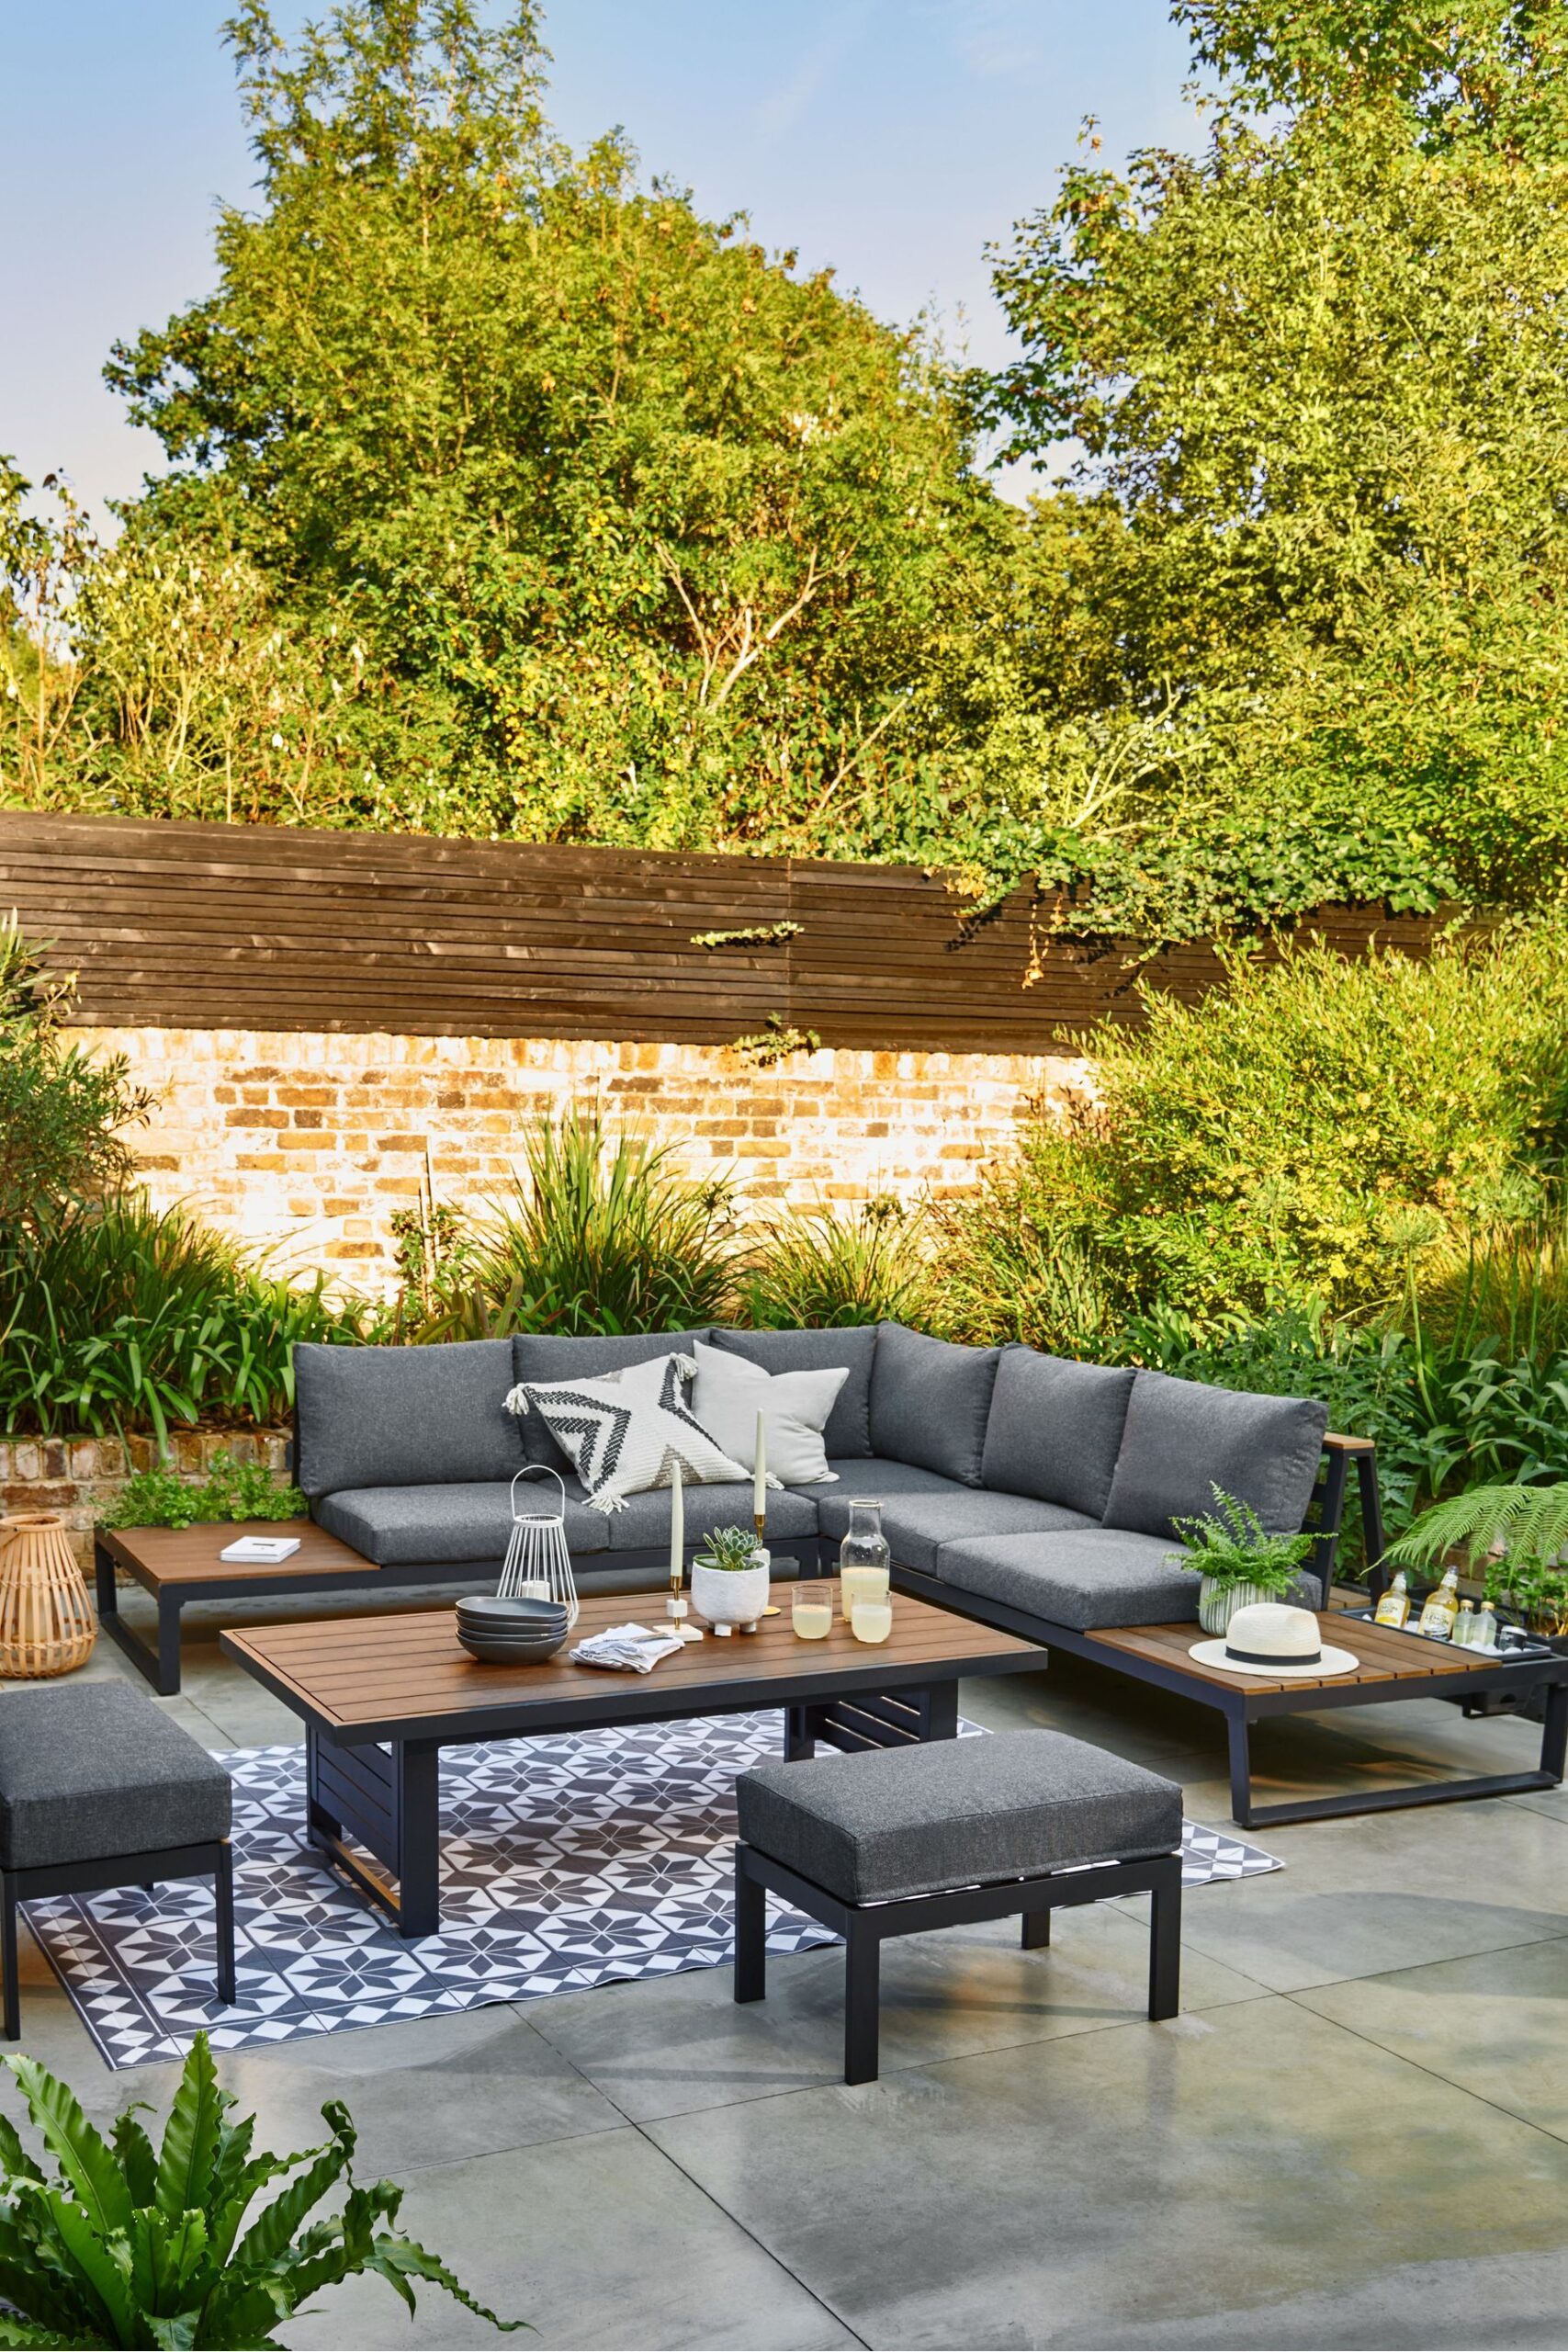 Furnishing Your Outdoor Oasis: The Beauty of Garden Furniture